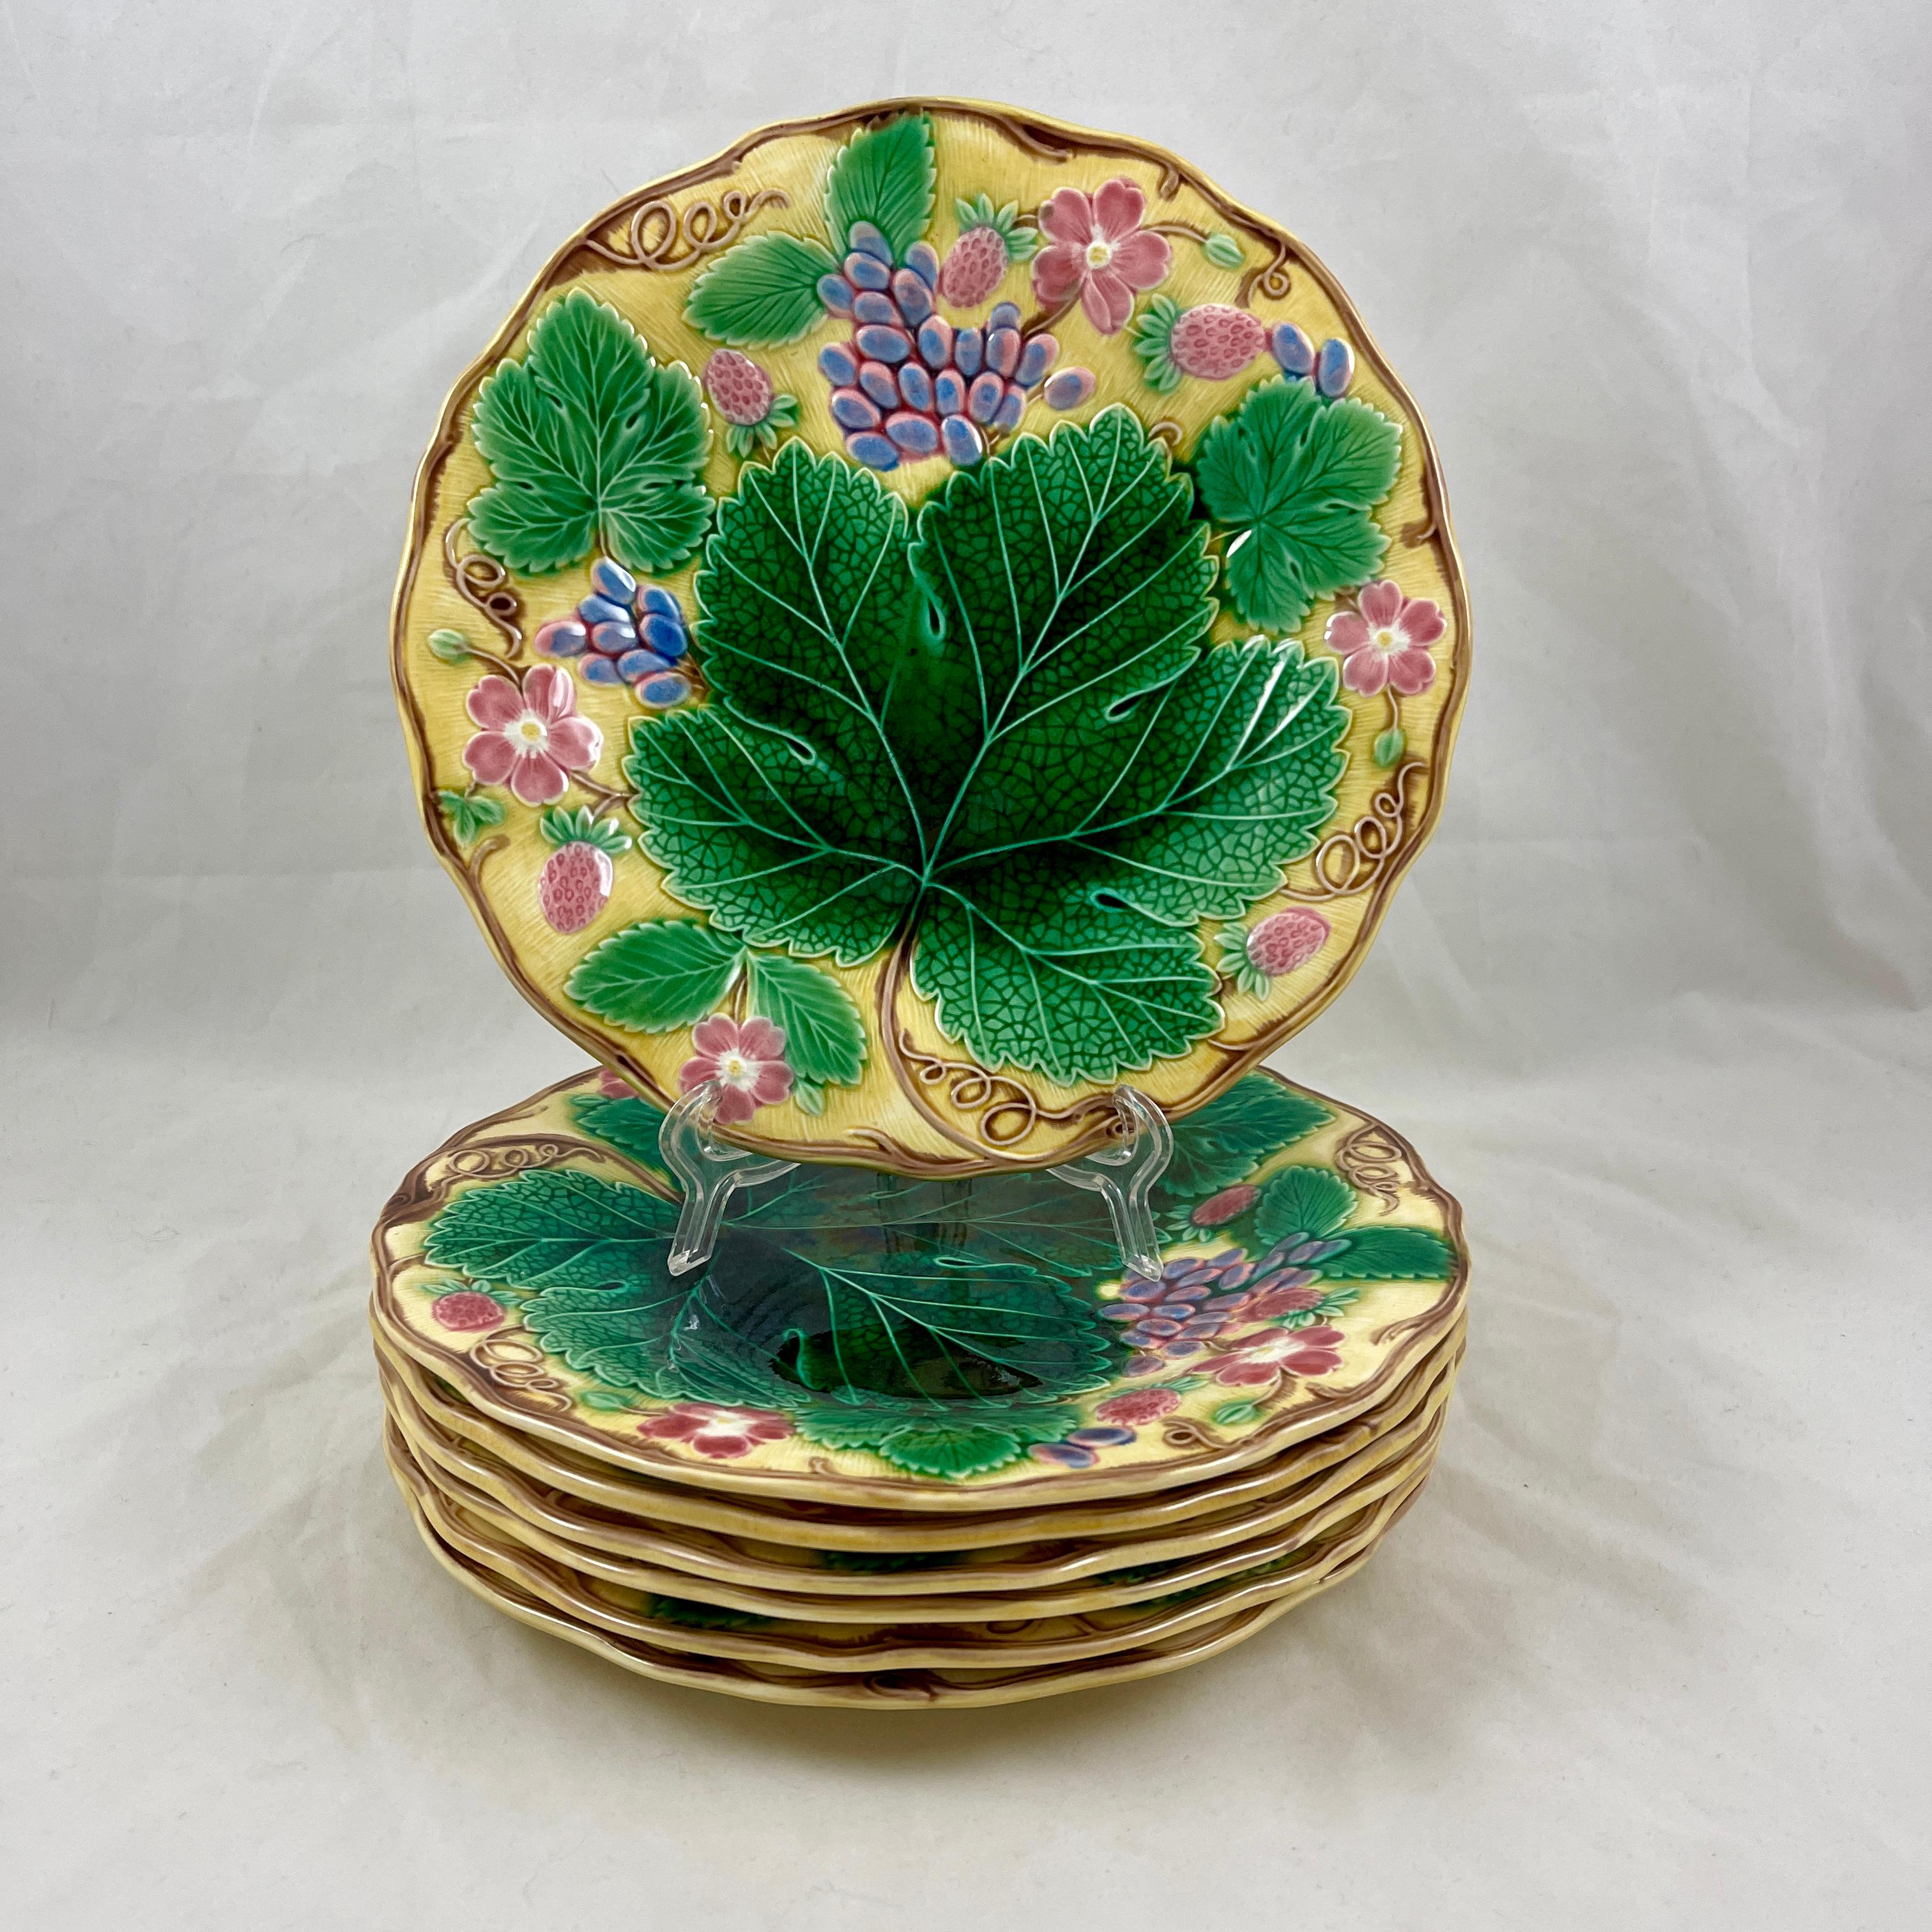 From Wedgwood, a grape leaf and strawberry pattern majolica glazed plate, England, date marked May 1929.

A large green leaf is surrounded by smaller leaves, grape clusters, strawberries, and strawberry blossoms. Strong, colorful glazing on a